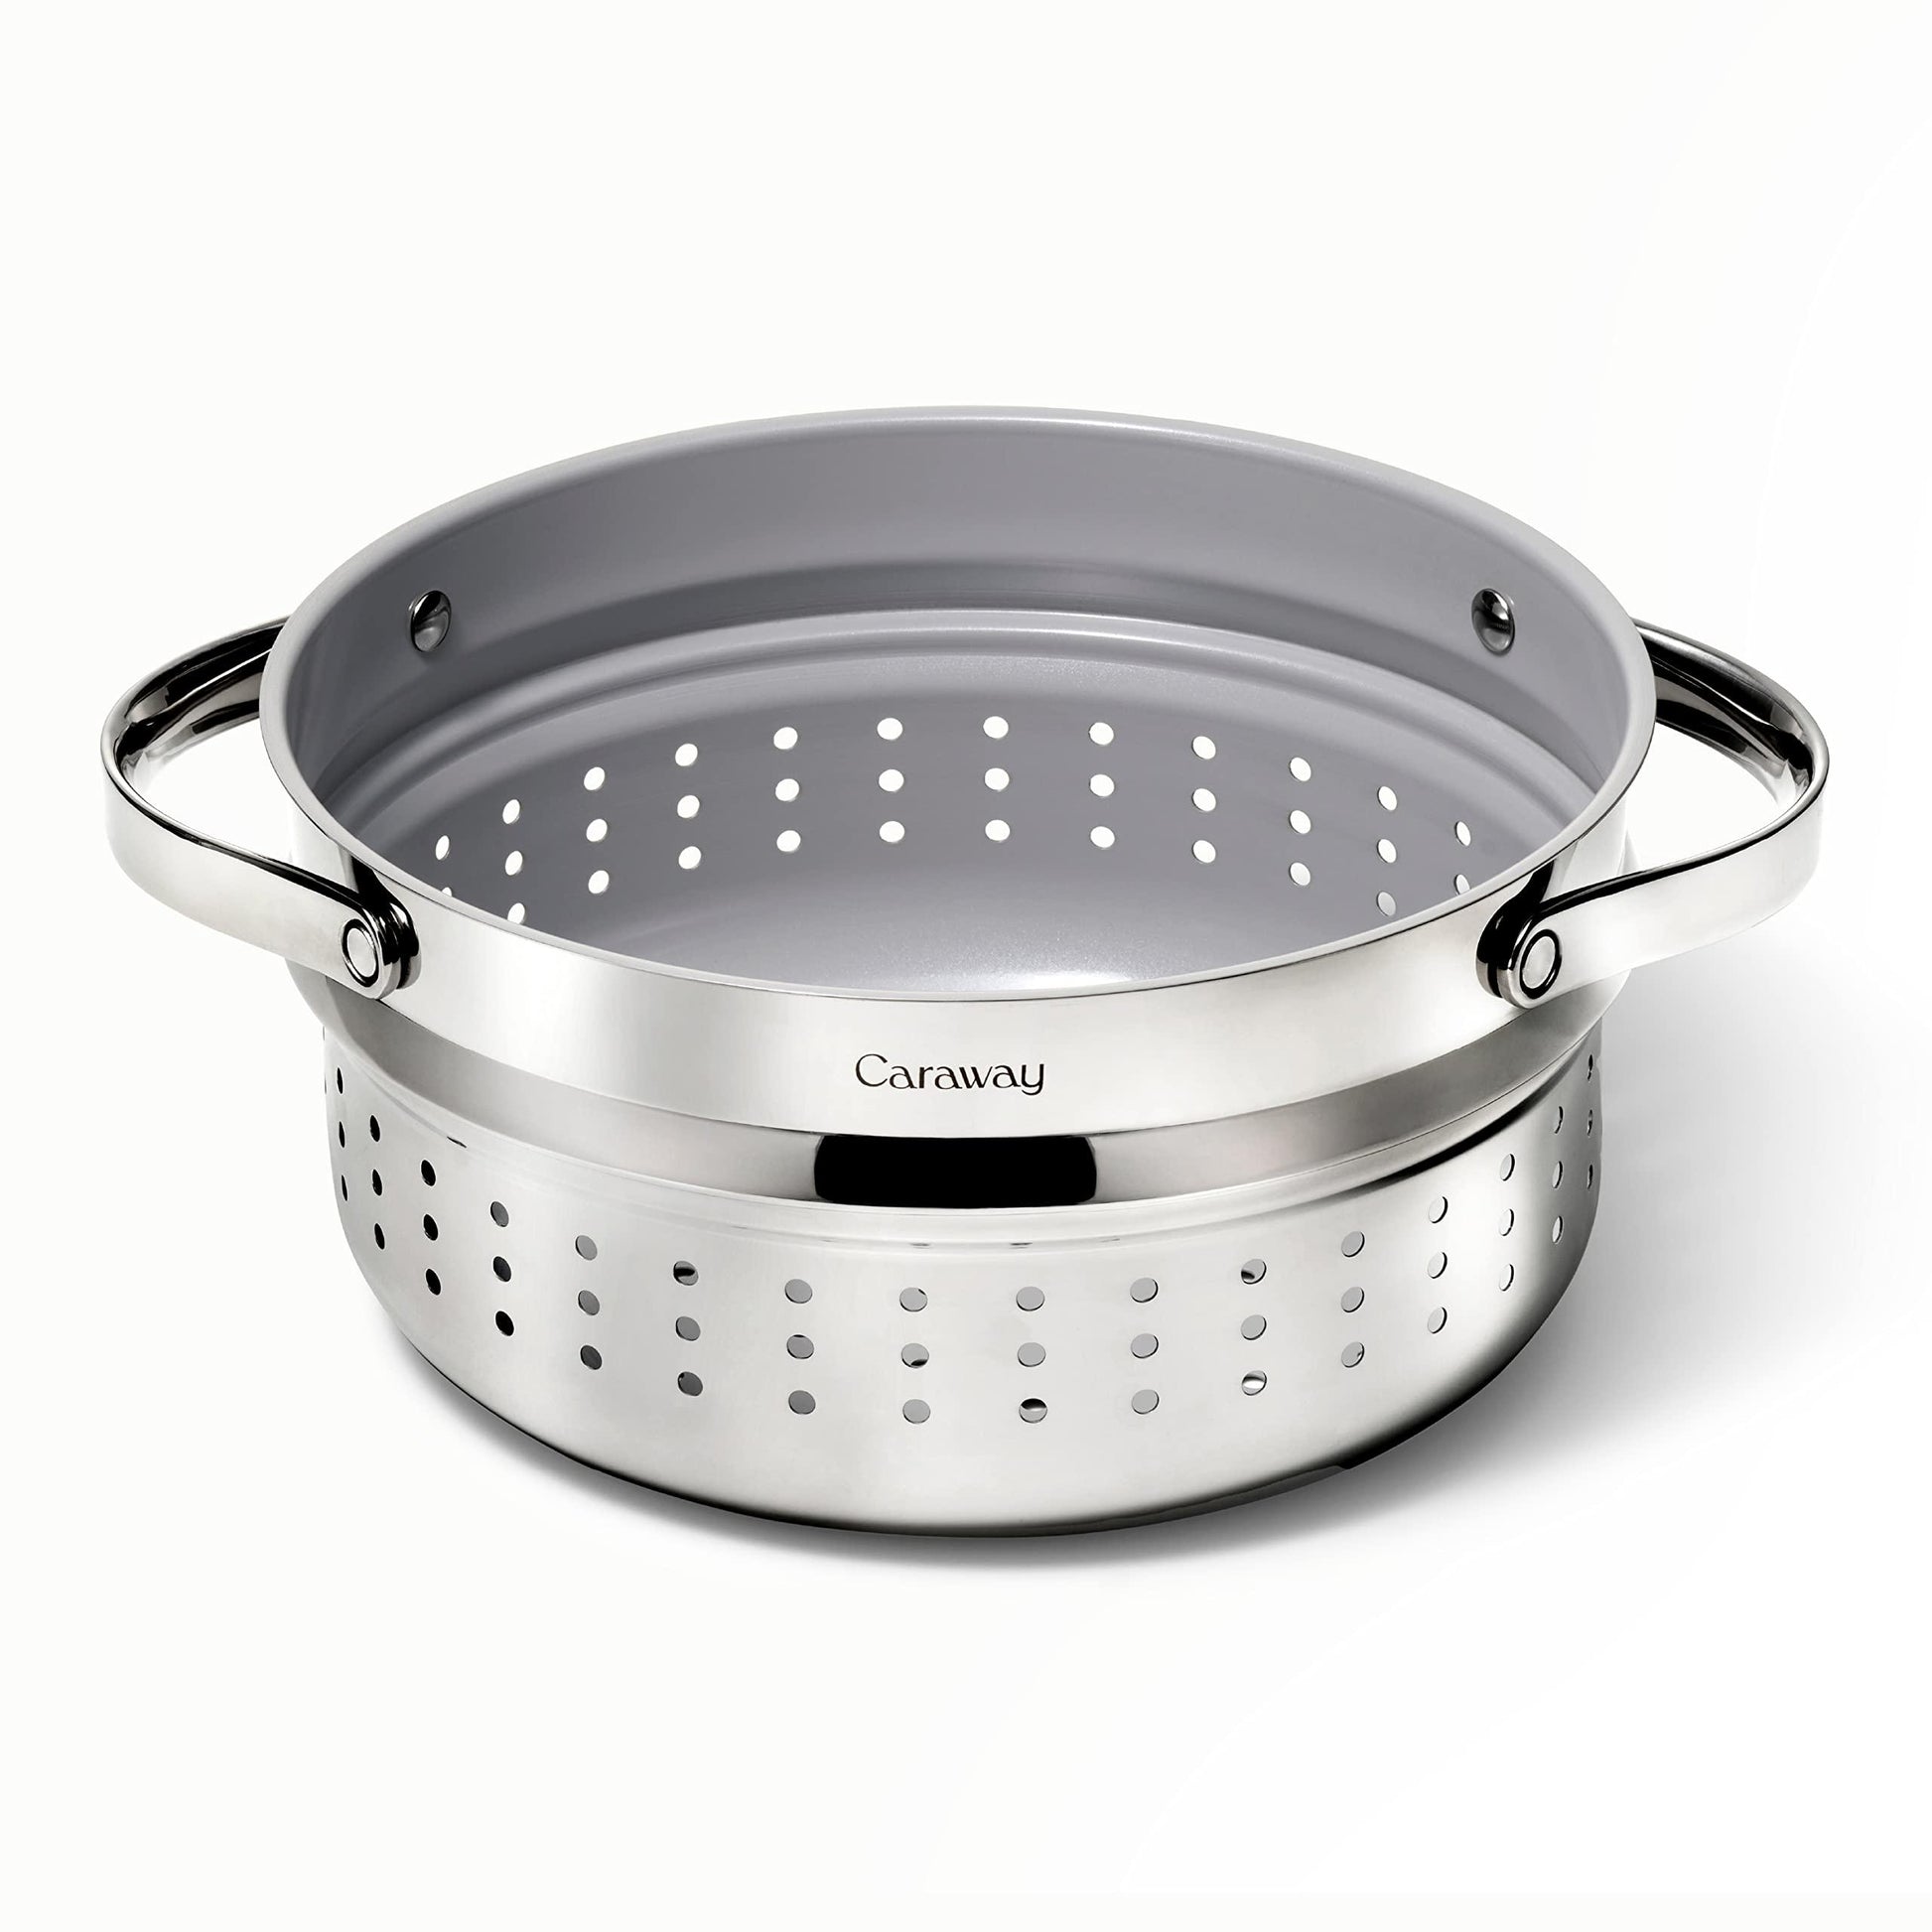 Caraway Steamer - Stainless Steel Steamer with Handles - Non Stick, Non Toxic Coating - Steam Veggies, Seafood, and More - Compatible With Our Dutch Oven or Sauce Pan - Large - CookCave